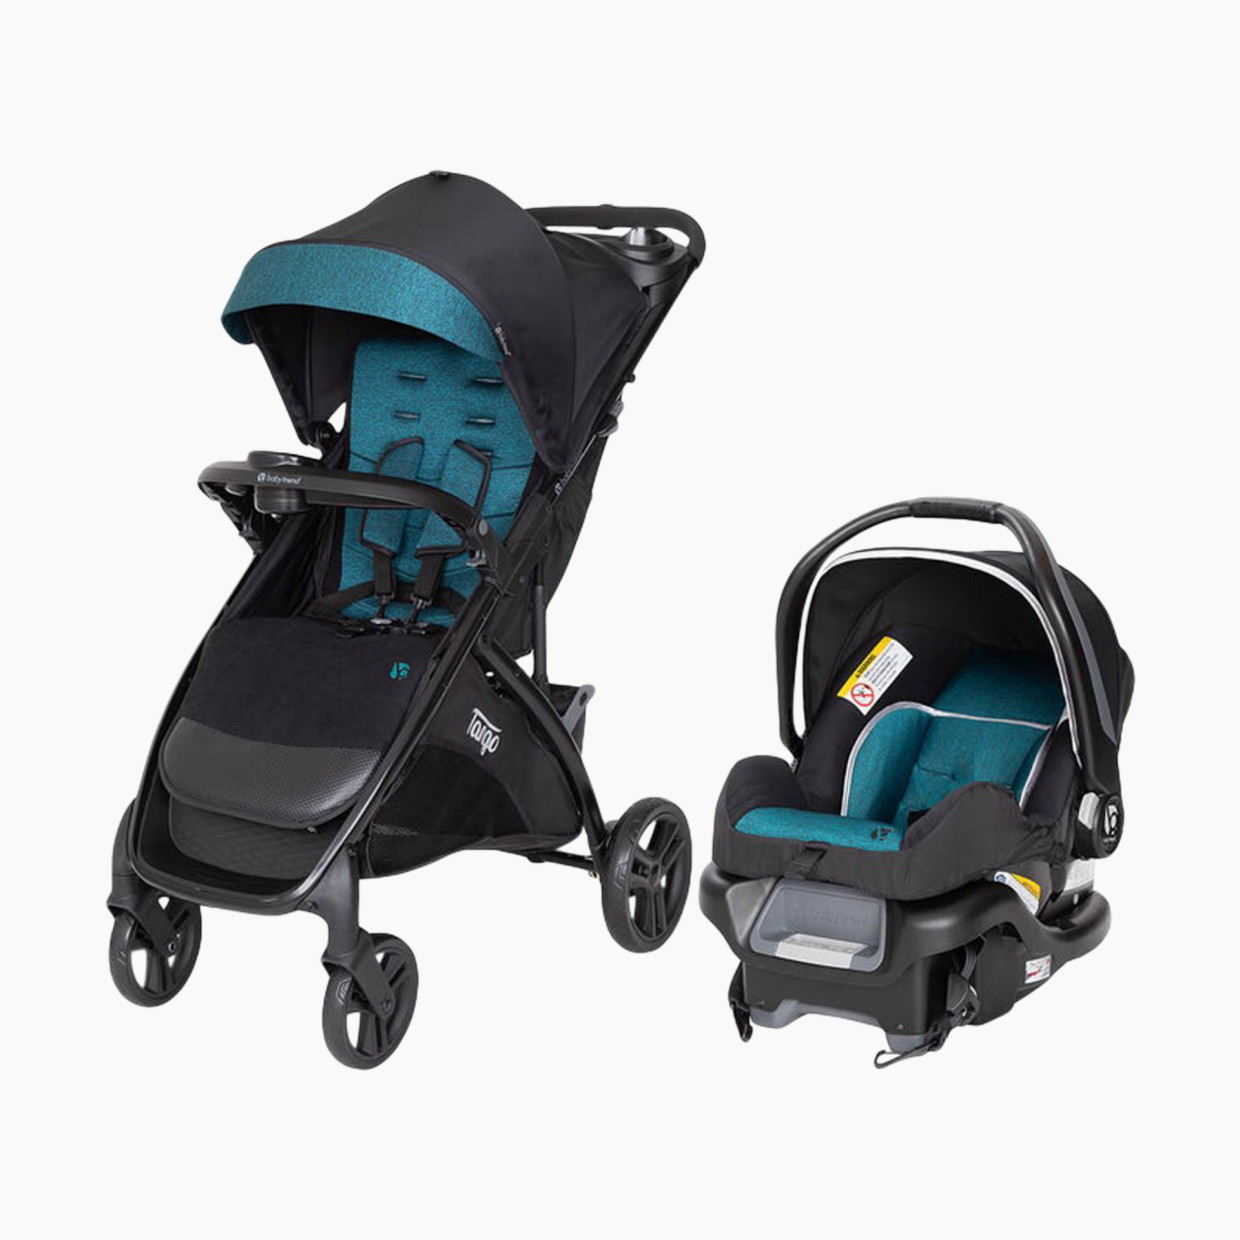 Baby Trend Tango Travel System - Veridian.